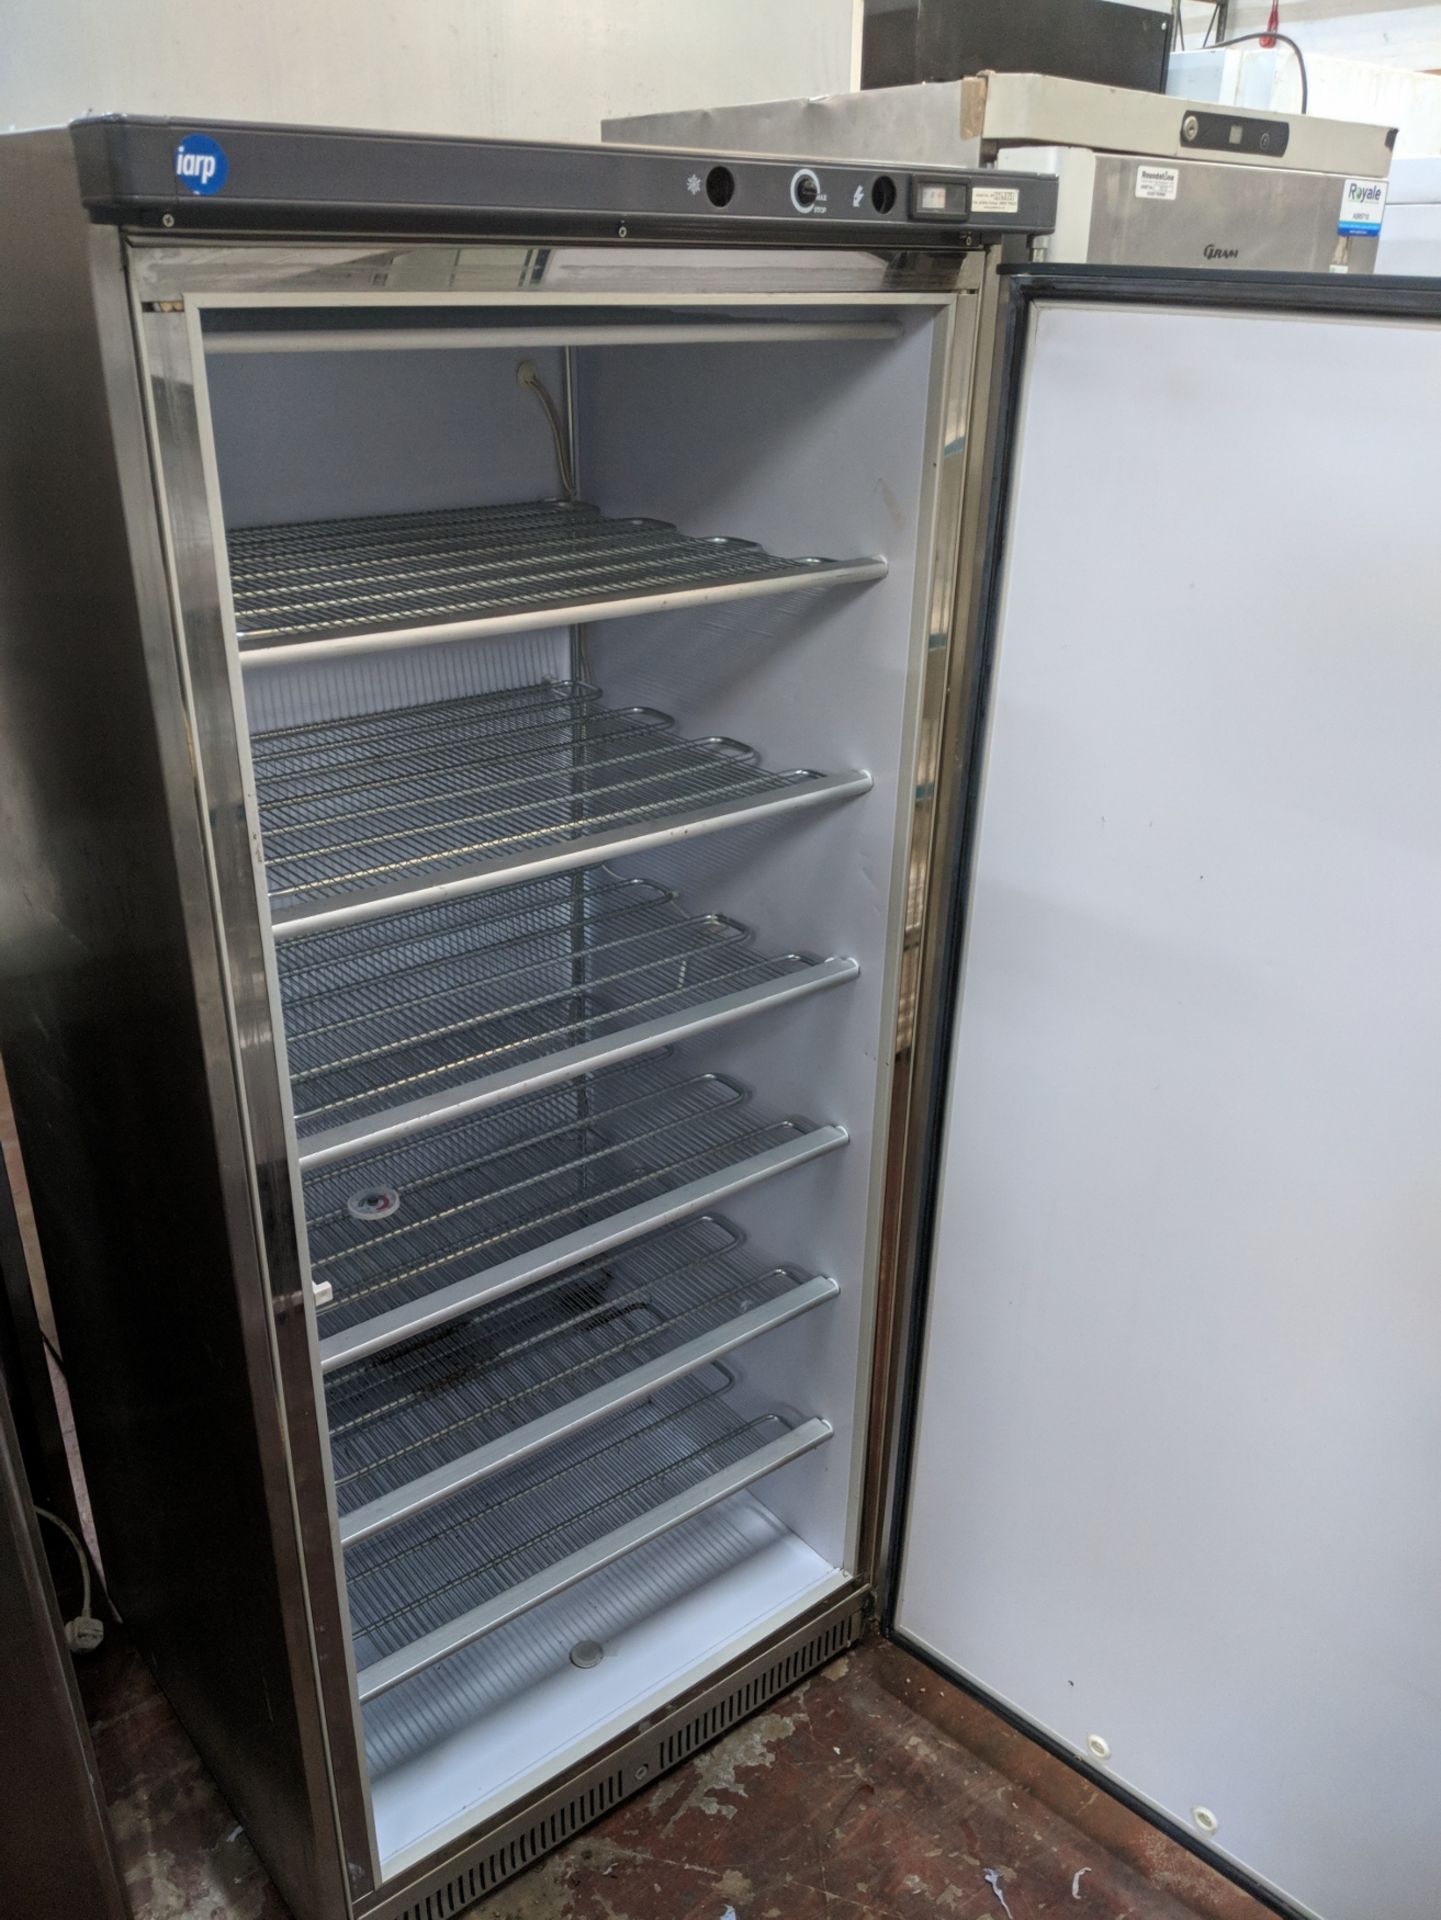 Iarp large wide silver freezer model ABX500N IMPORTANT: Please remember goods successfully bid - Image 2 of 3